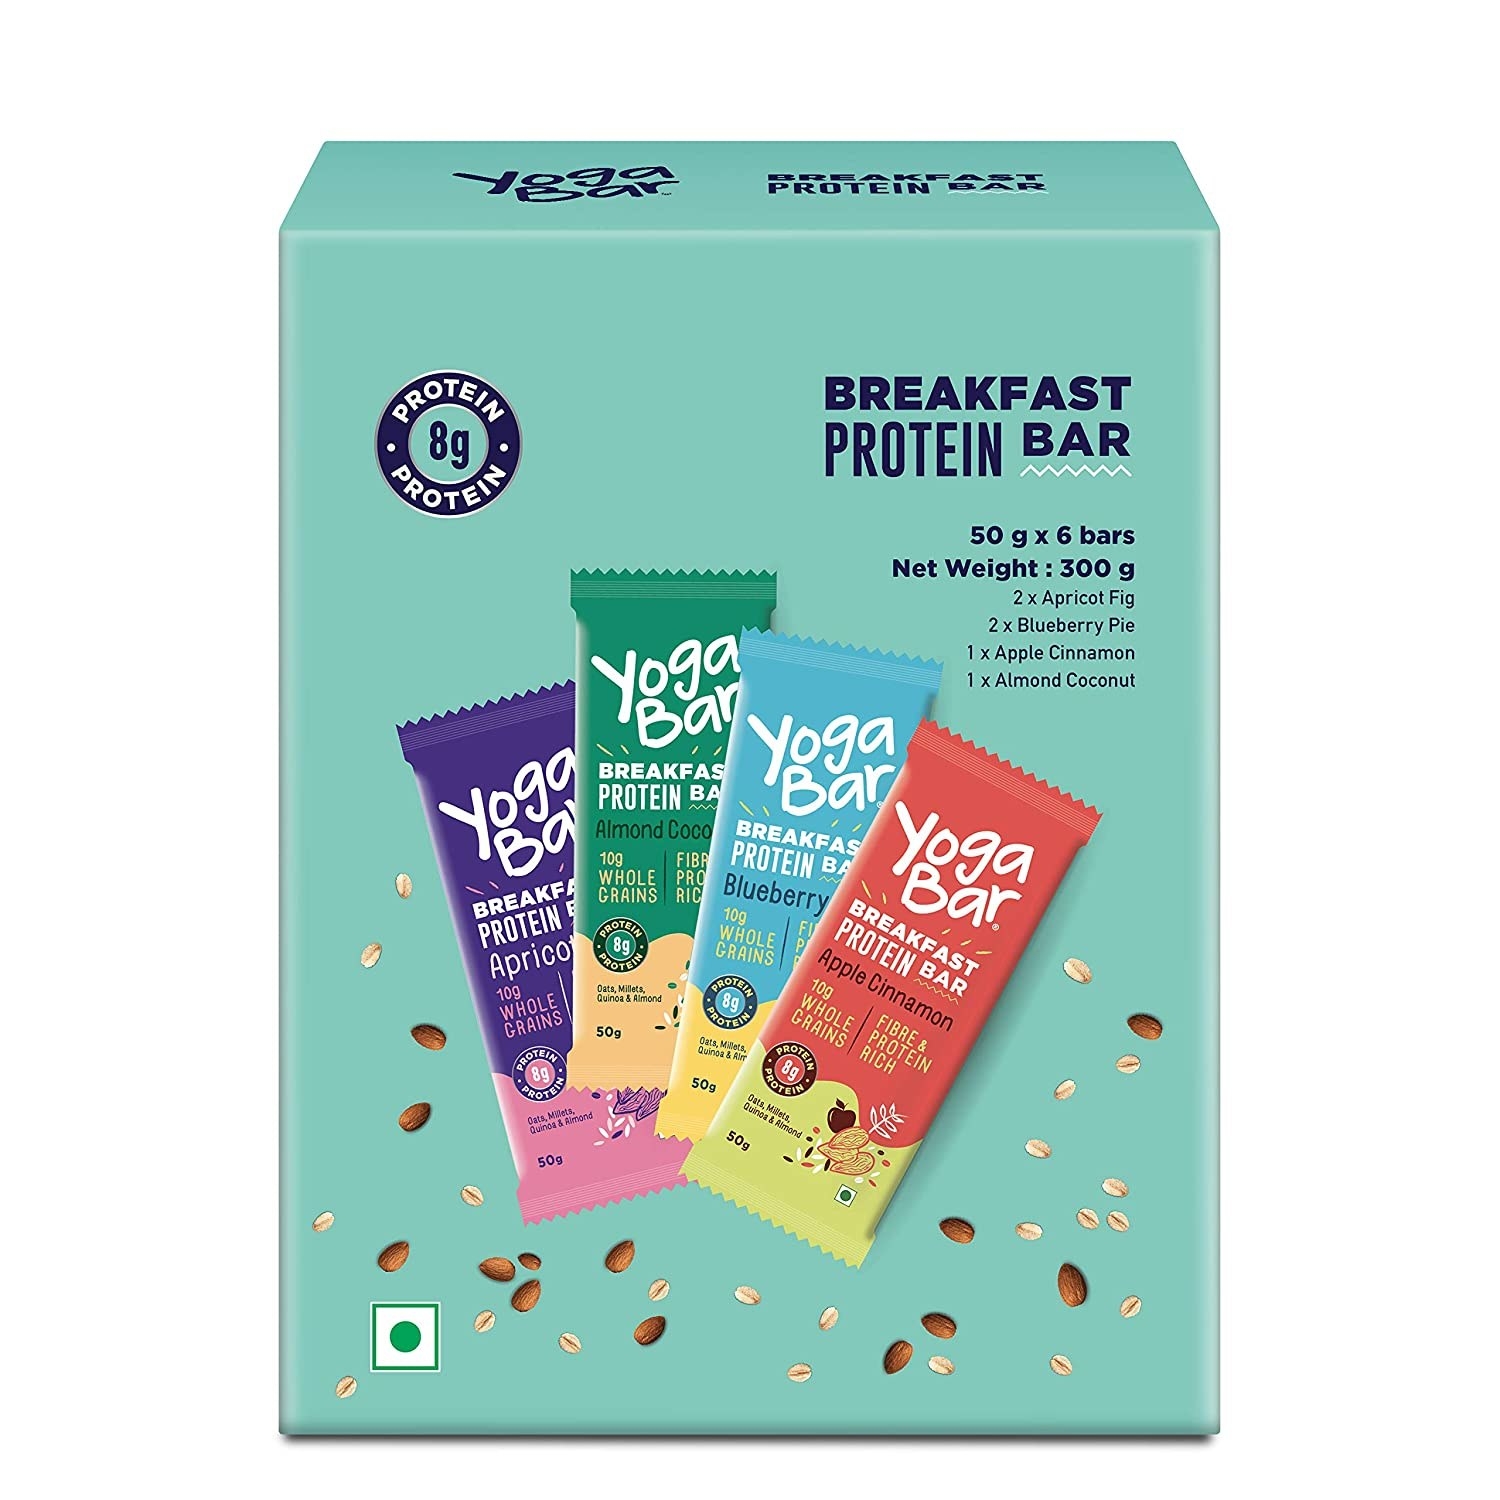 Packaging of the protein bars 